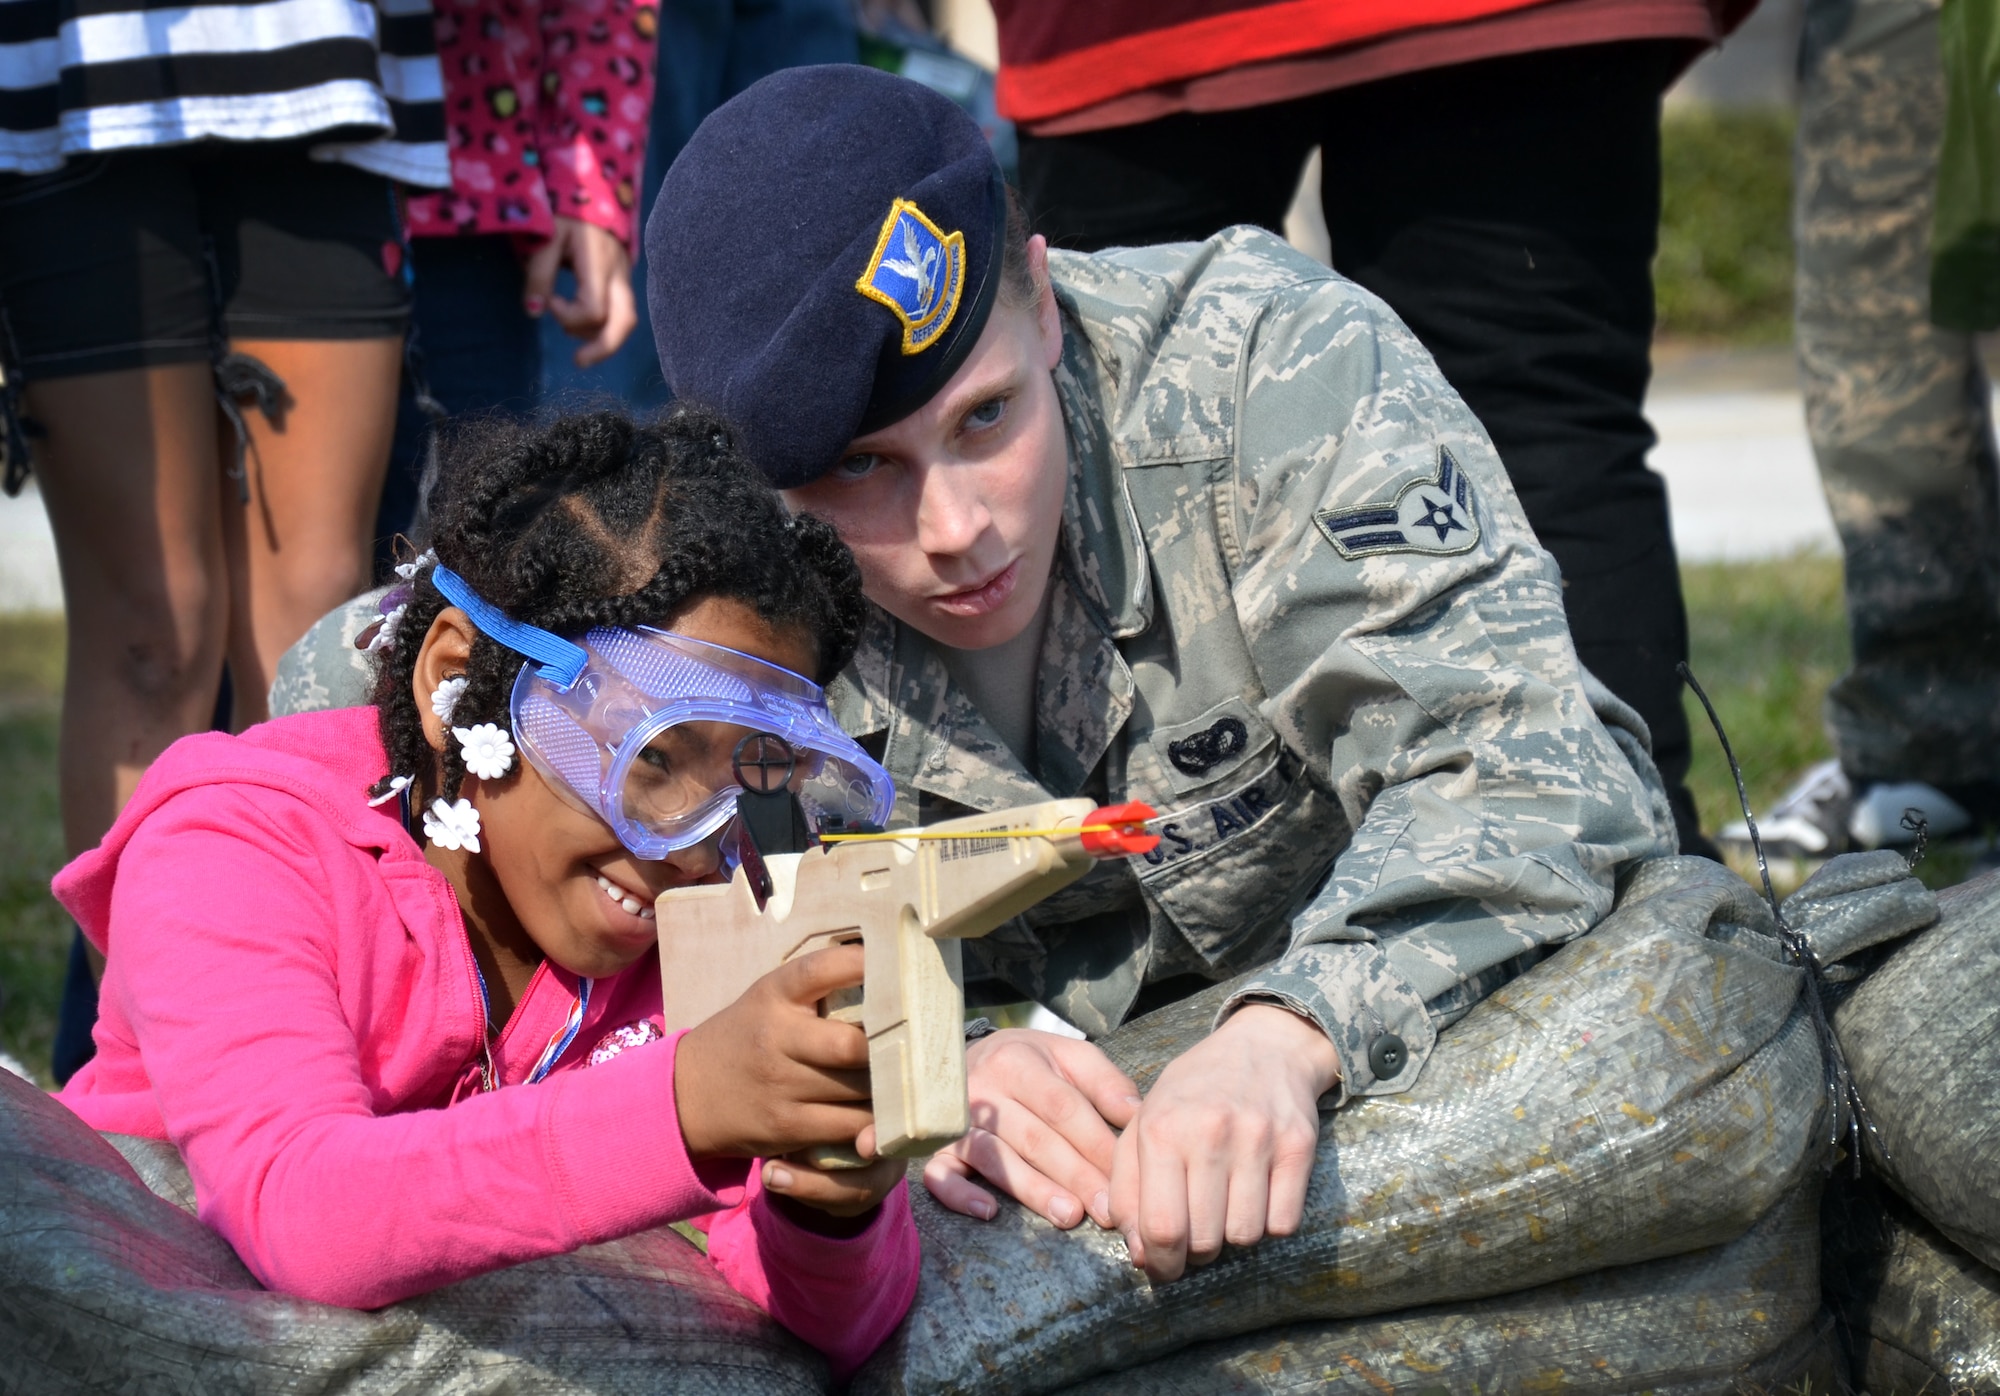 A Security Forces Airman helps a child aim a rubber band gun at a plastic target during the Kids Understanding Deployments event at Patrick Air Force Base, Fla., Jan. 7, 2012. The event was designed to help active-duty and Reserve dependent children learn about the deployment process in a fun, interactive way.  (U.S. Air Force photo/Staff Sgt. Anna-Marie Wyant)